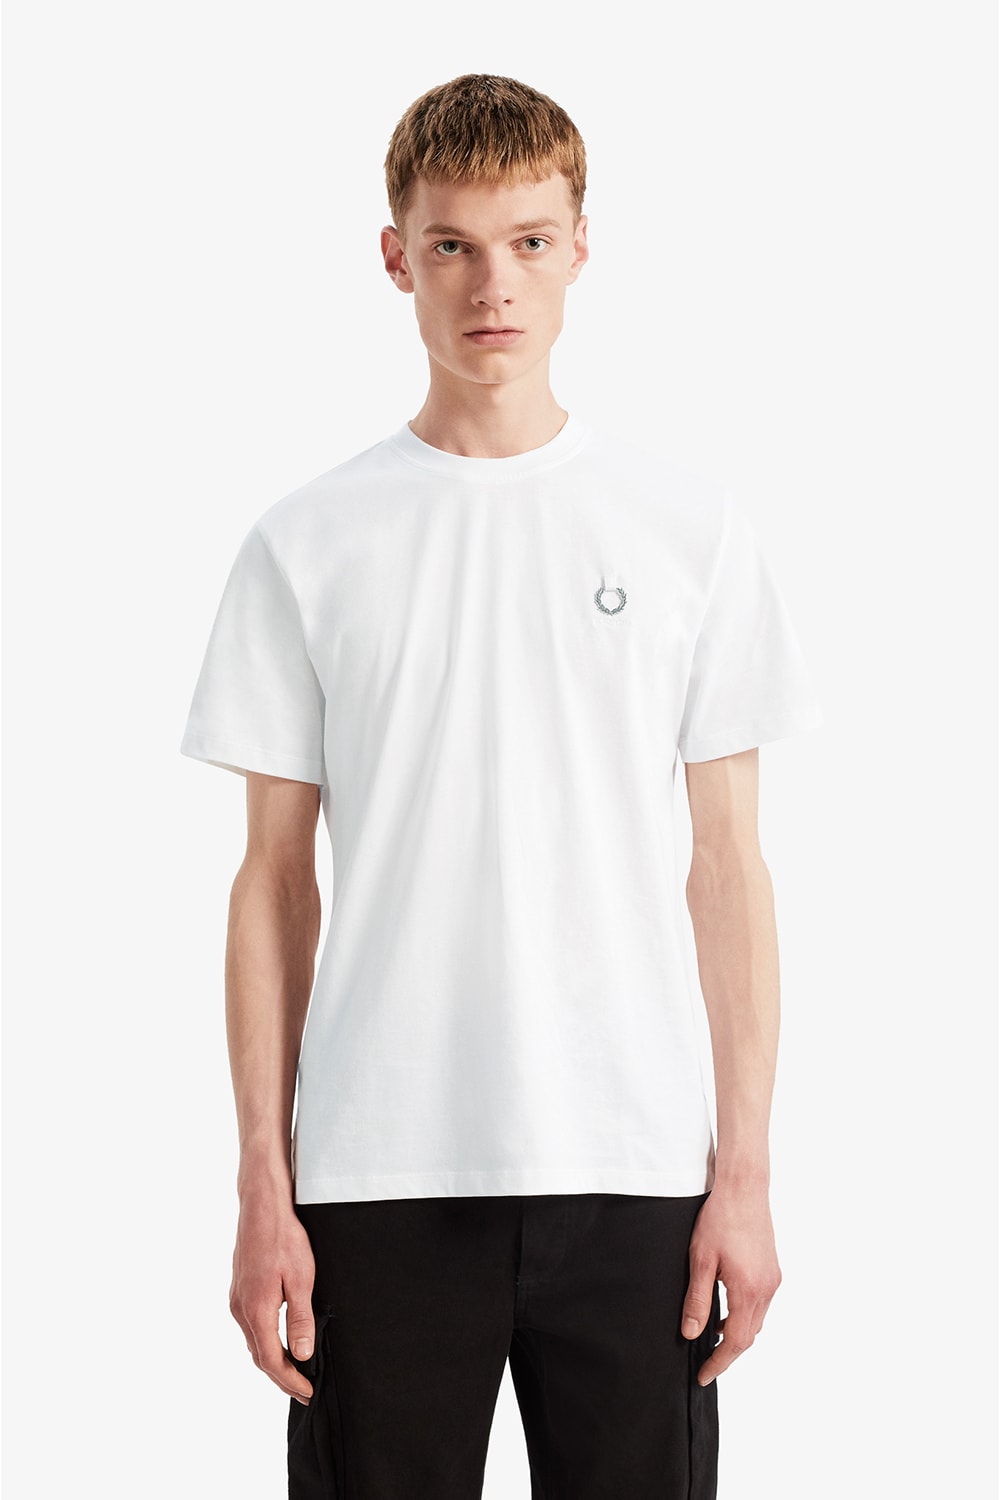 raf simons fred perry fall winter 2019 release information details buy cop purchase collection george plember gavin watson